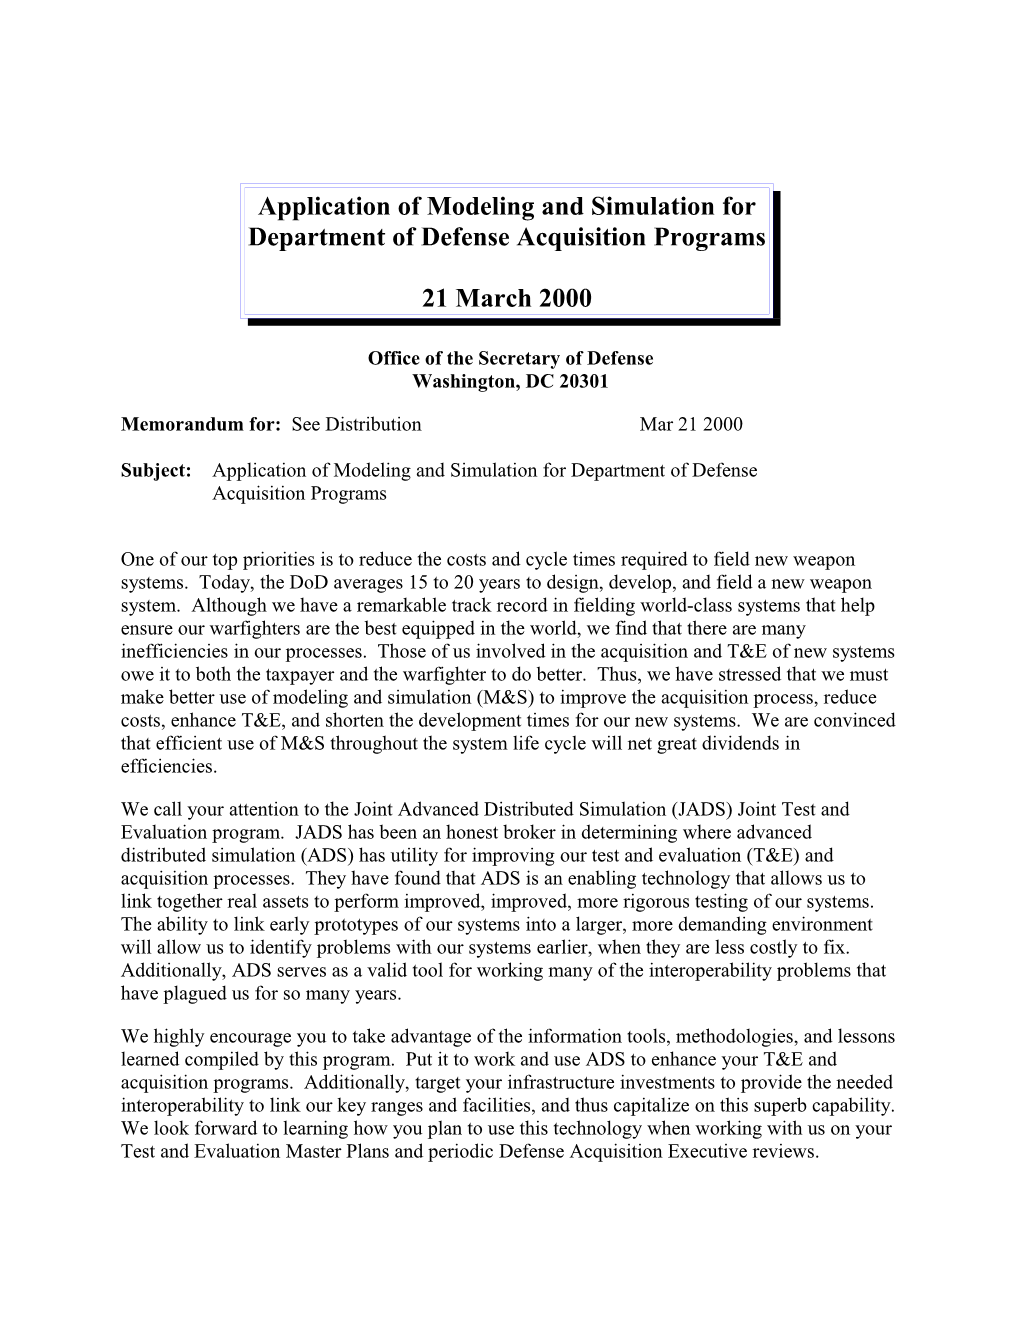 Application of Modeling and Simulation for Department of Defense Acquisition Programs